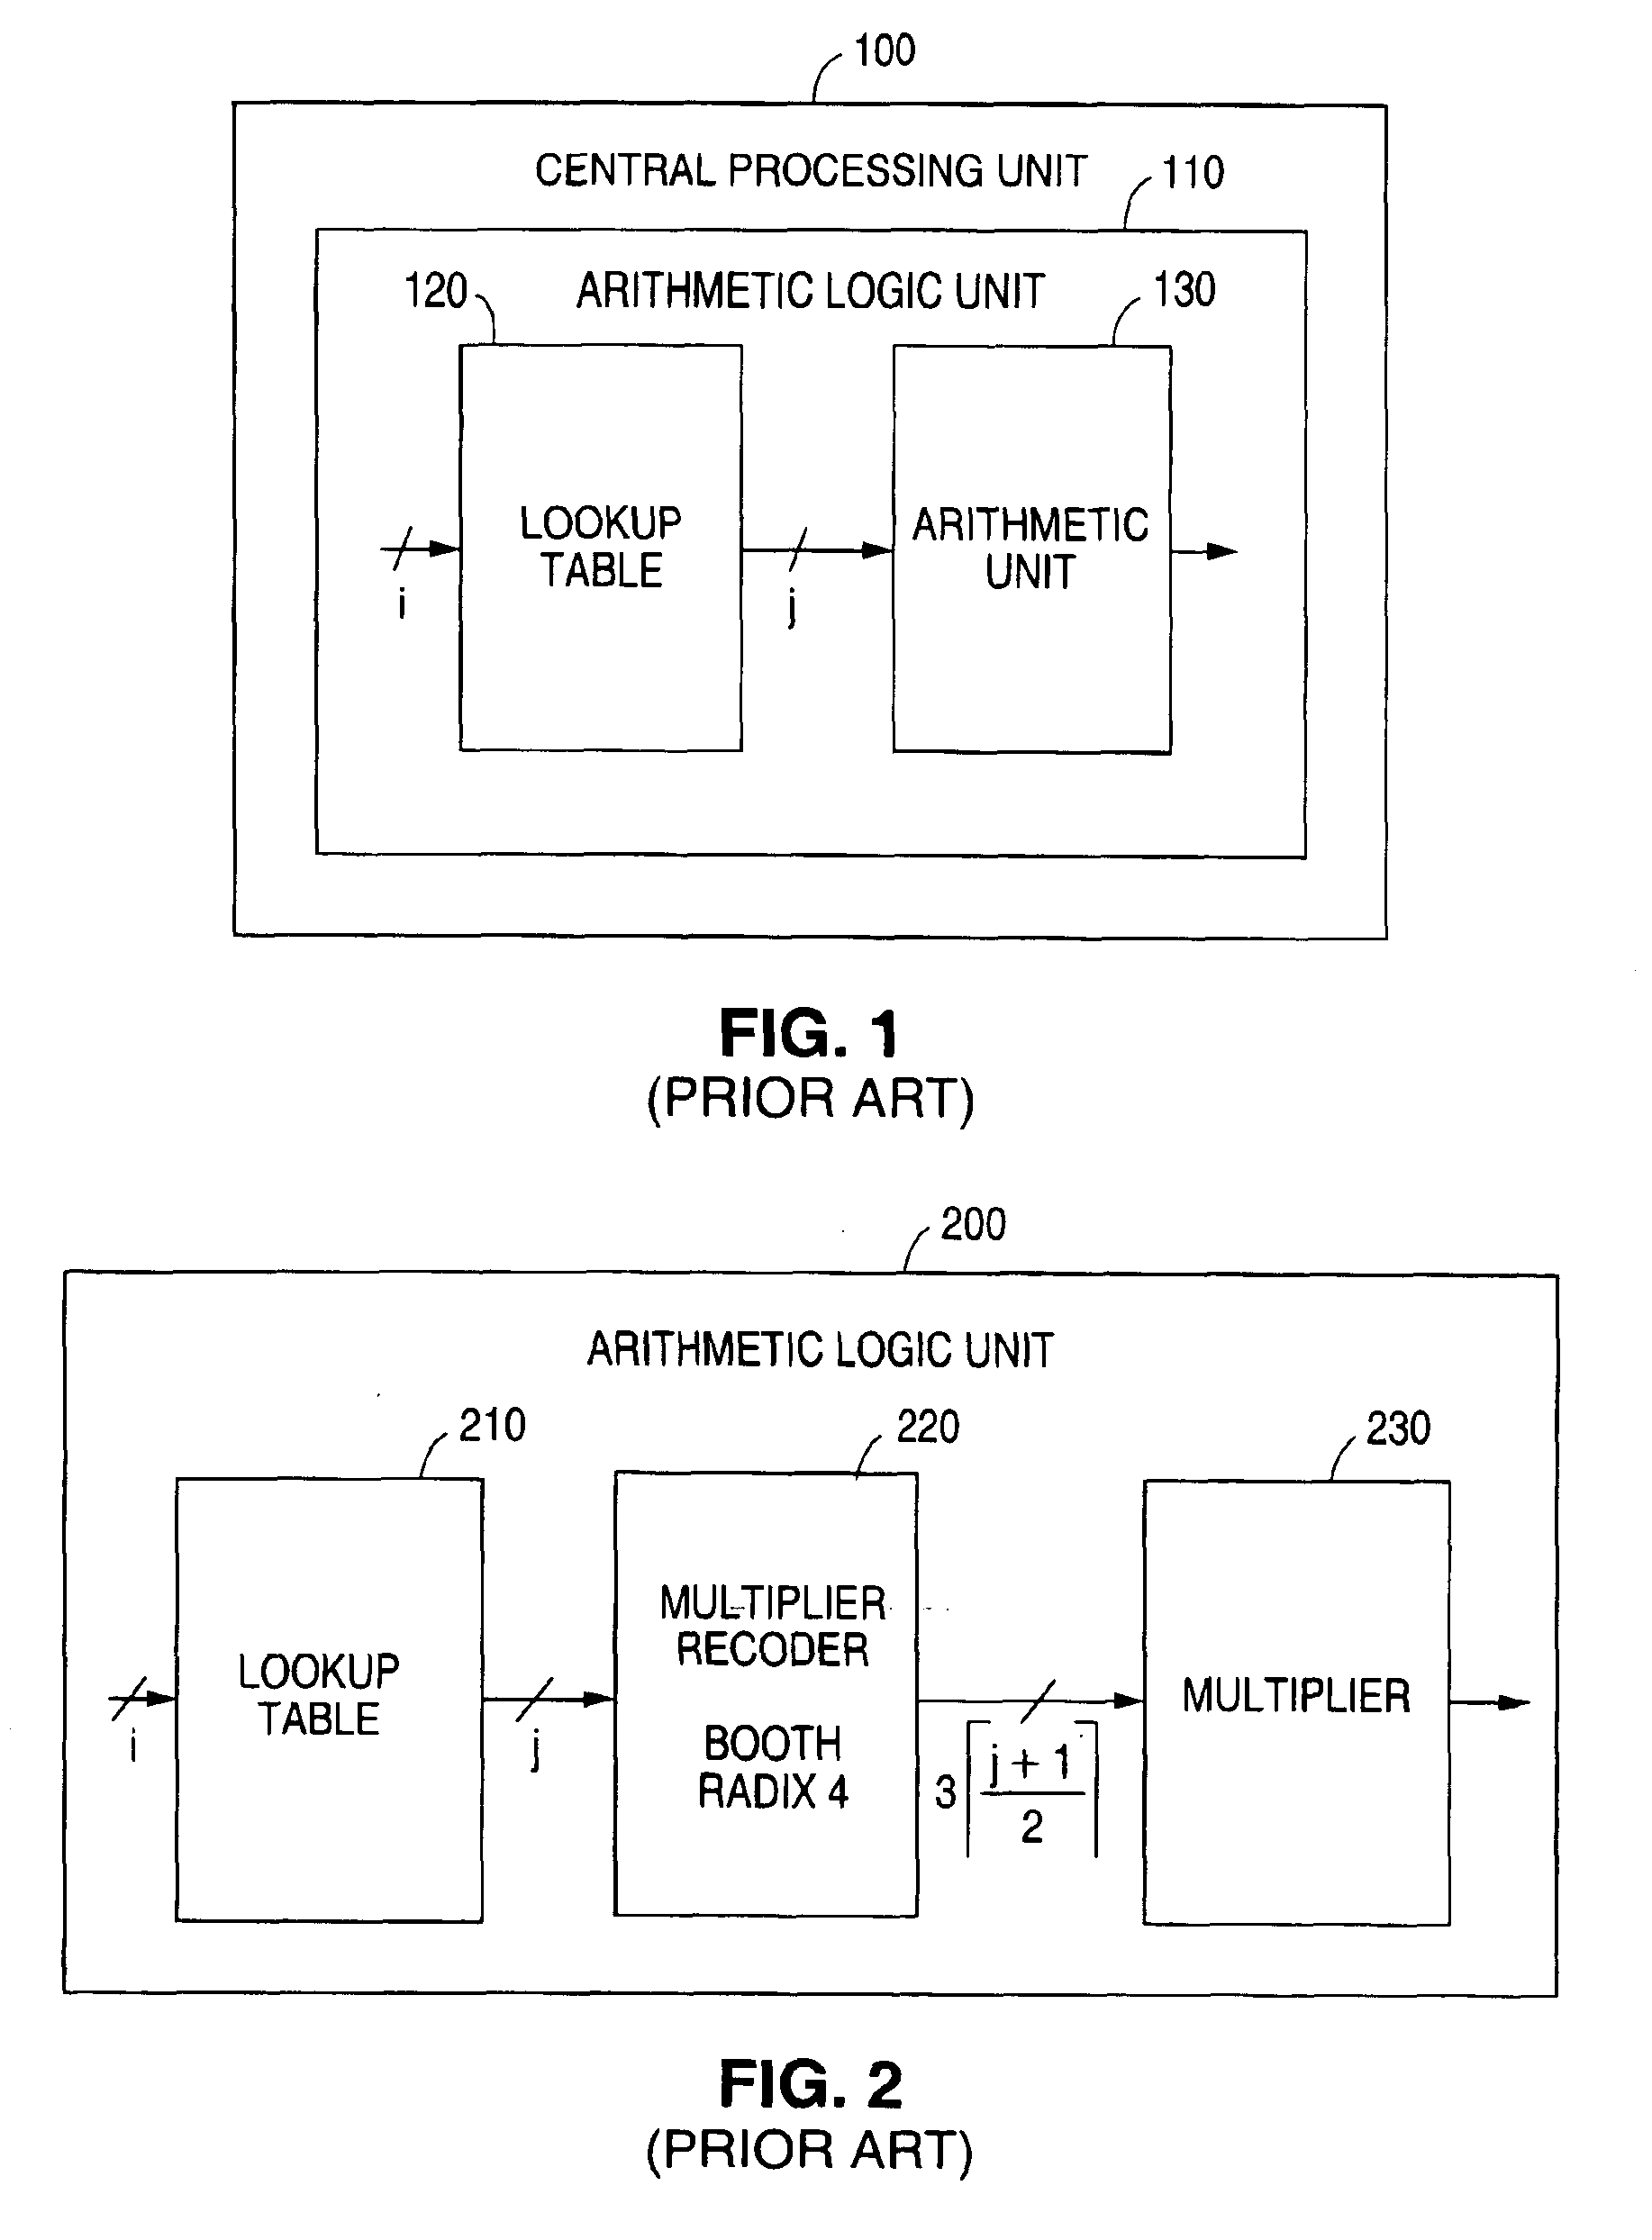 Apparatus and method for providing higher radix redundant digit lookup tables for recoding and compressing function values